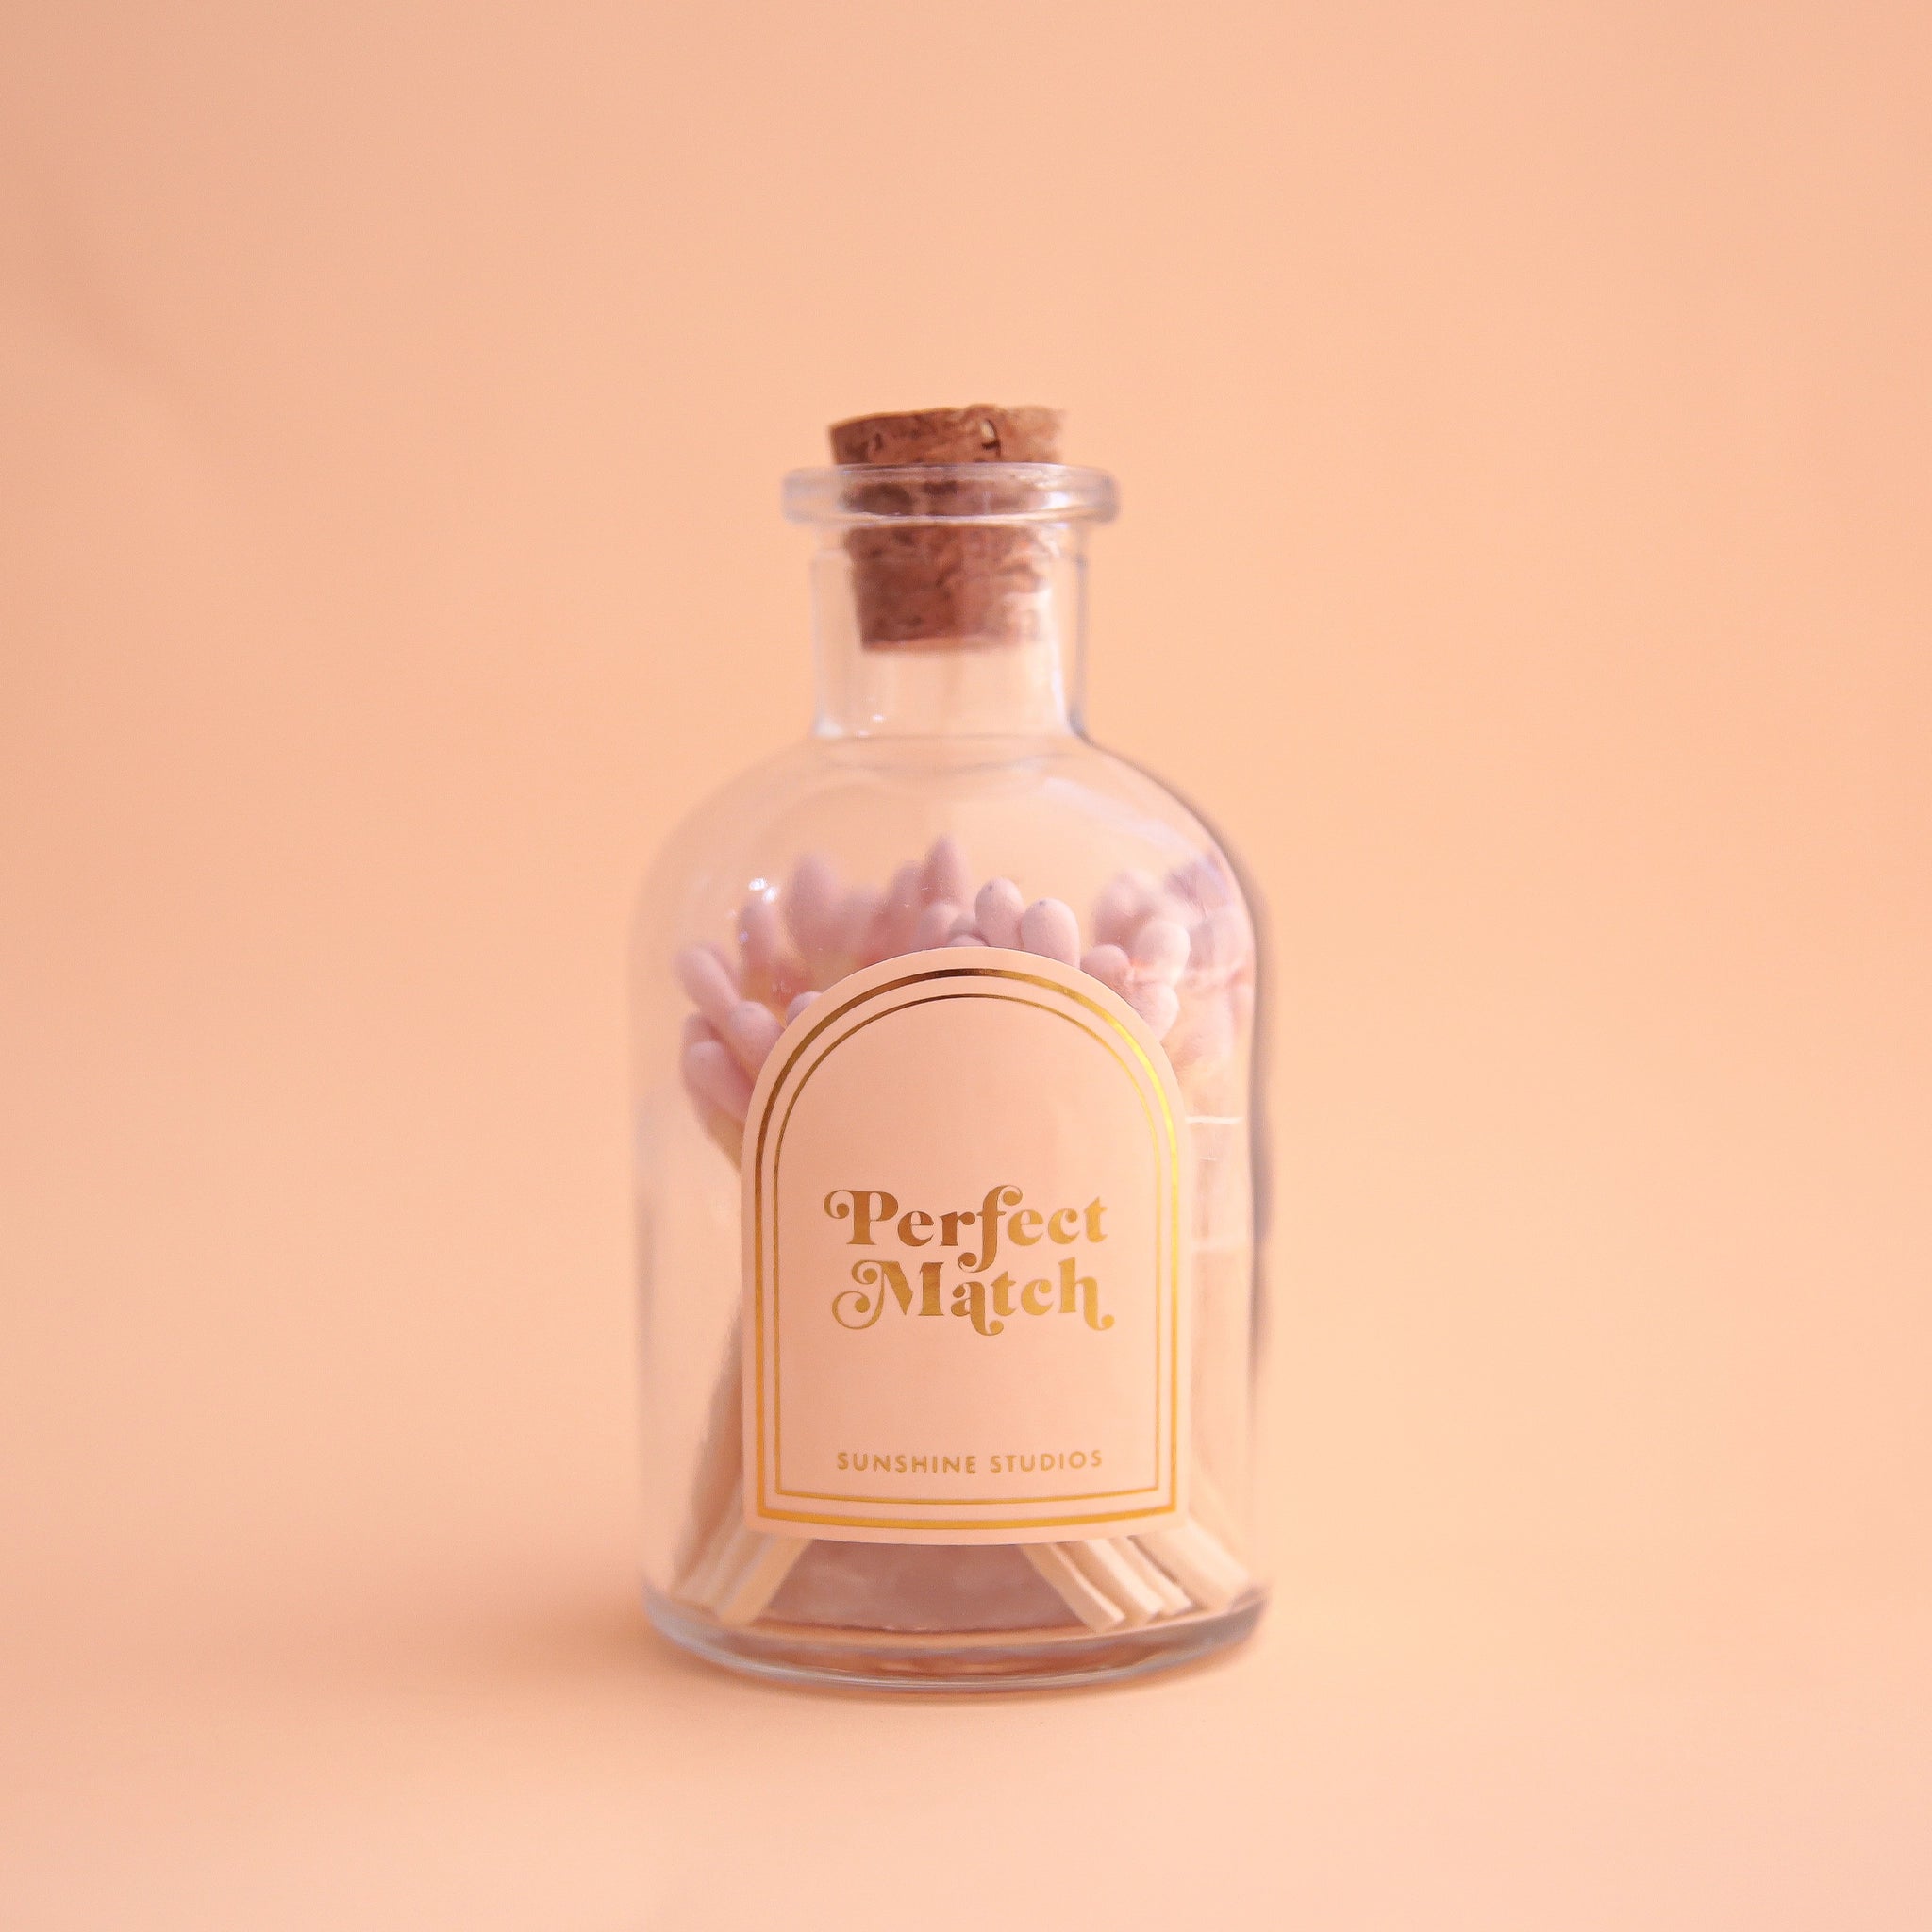 On a light peach background is a clear jar of matches with a cork top and light pink wooden matches inside. The label is a light pink and gold lined arch that reads, "Perfect Match".